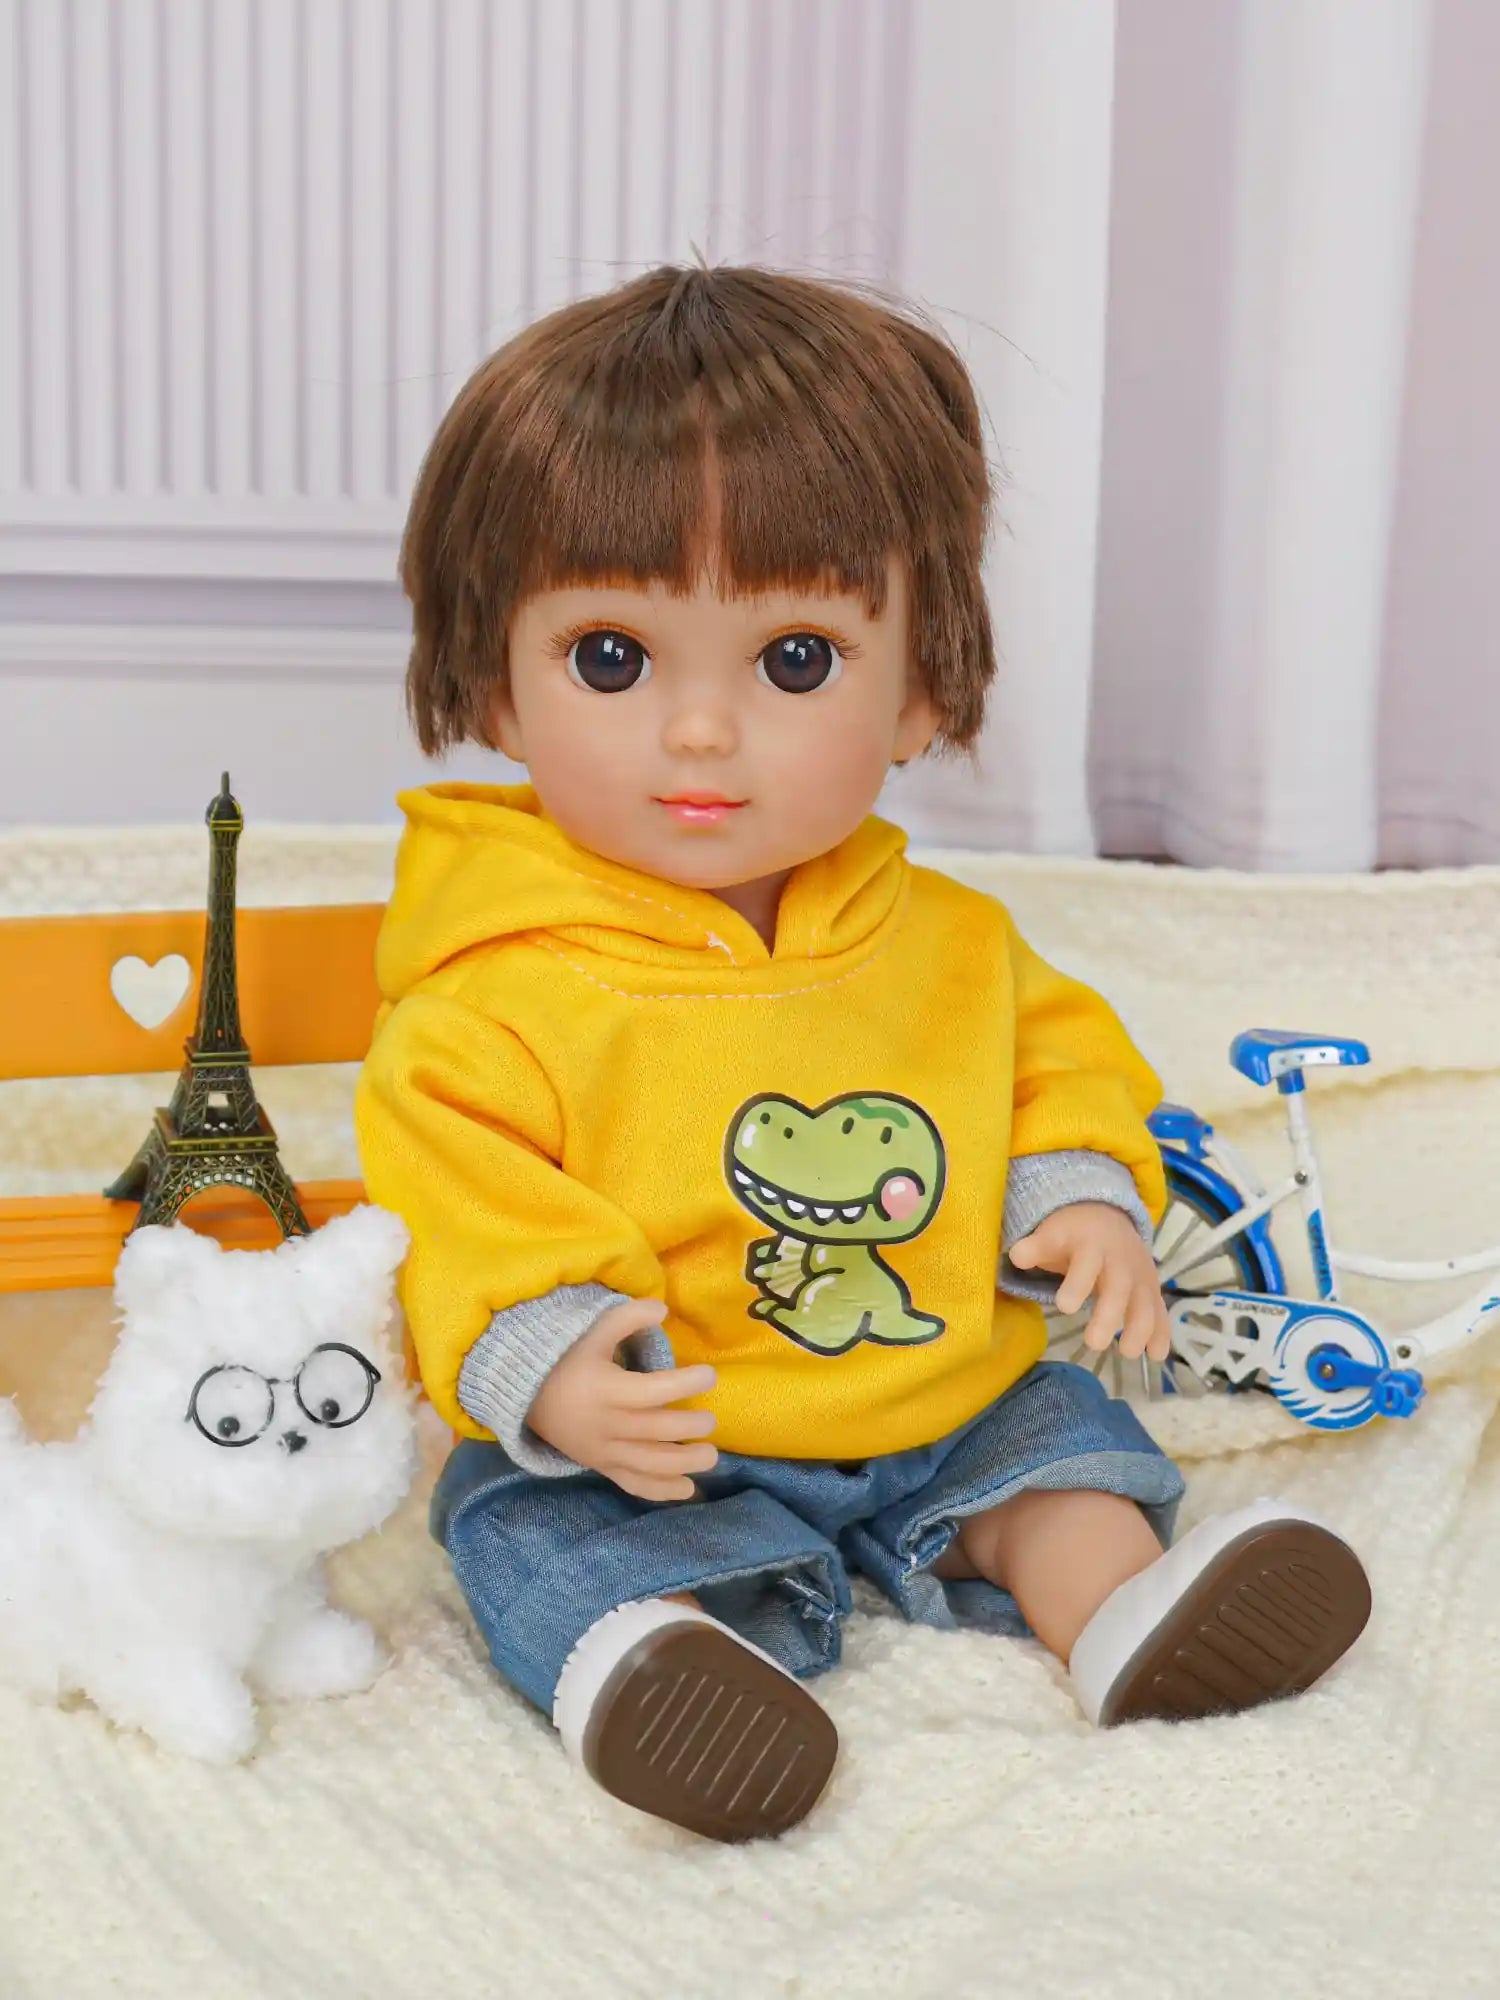 Casual doll with a dinosaur on its sweatshirt, beside a fluffy dog toy and a toy bike.